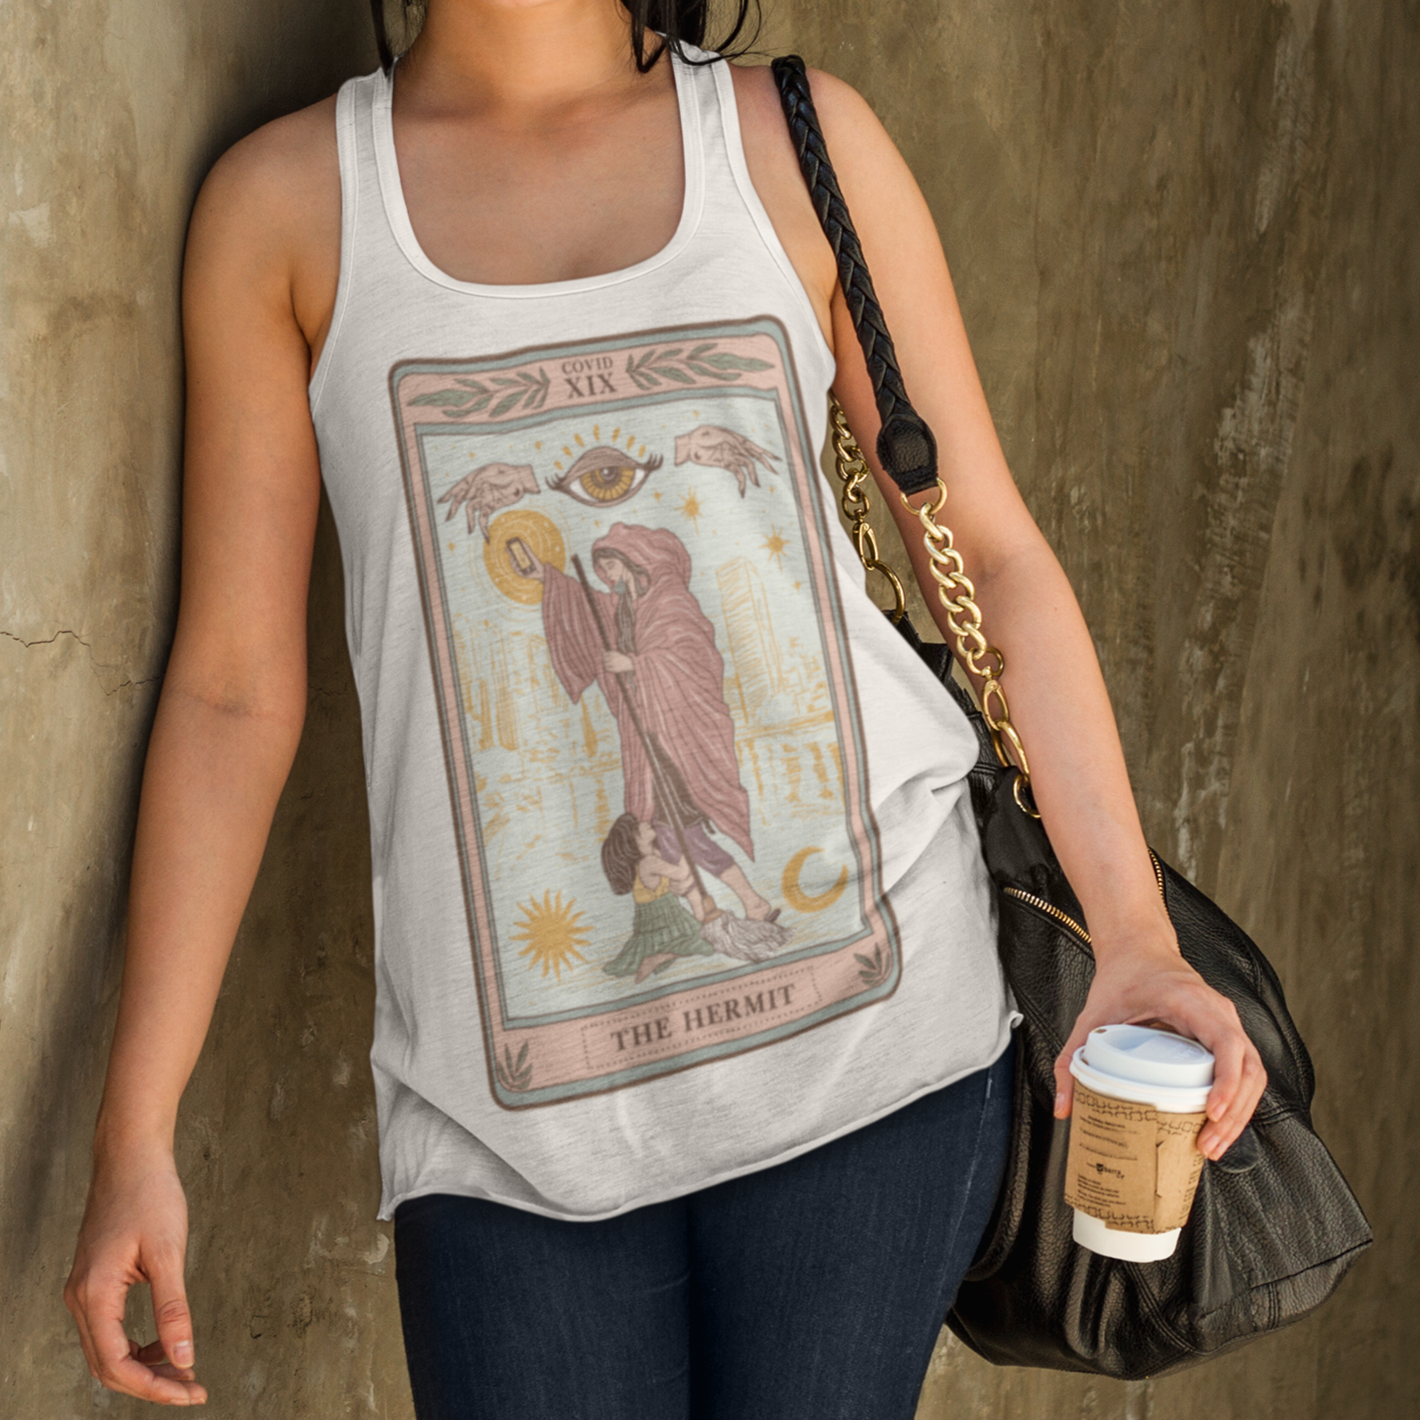 « THE HERMIT » WOMEN'S SLOUCHY or RACERBACK TANK